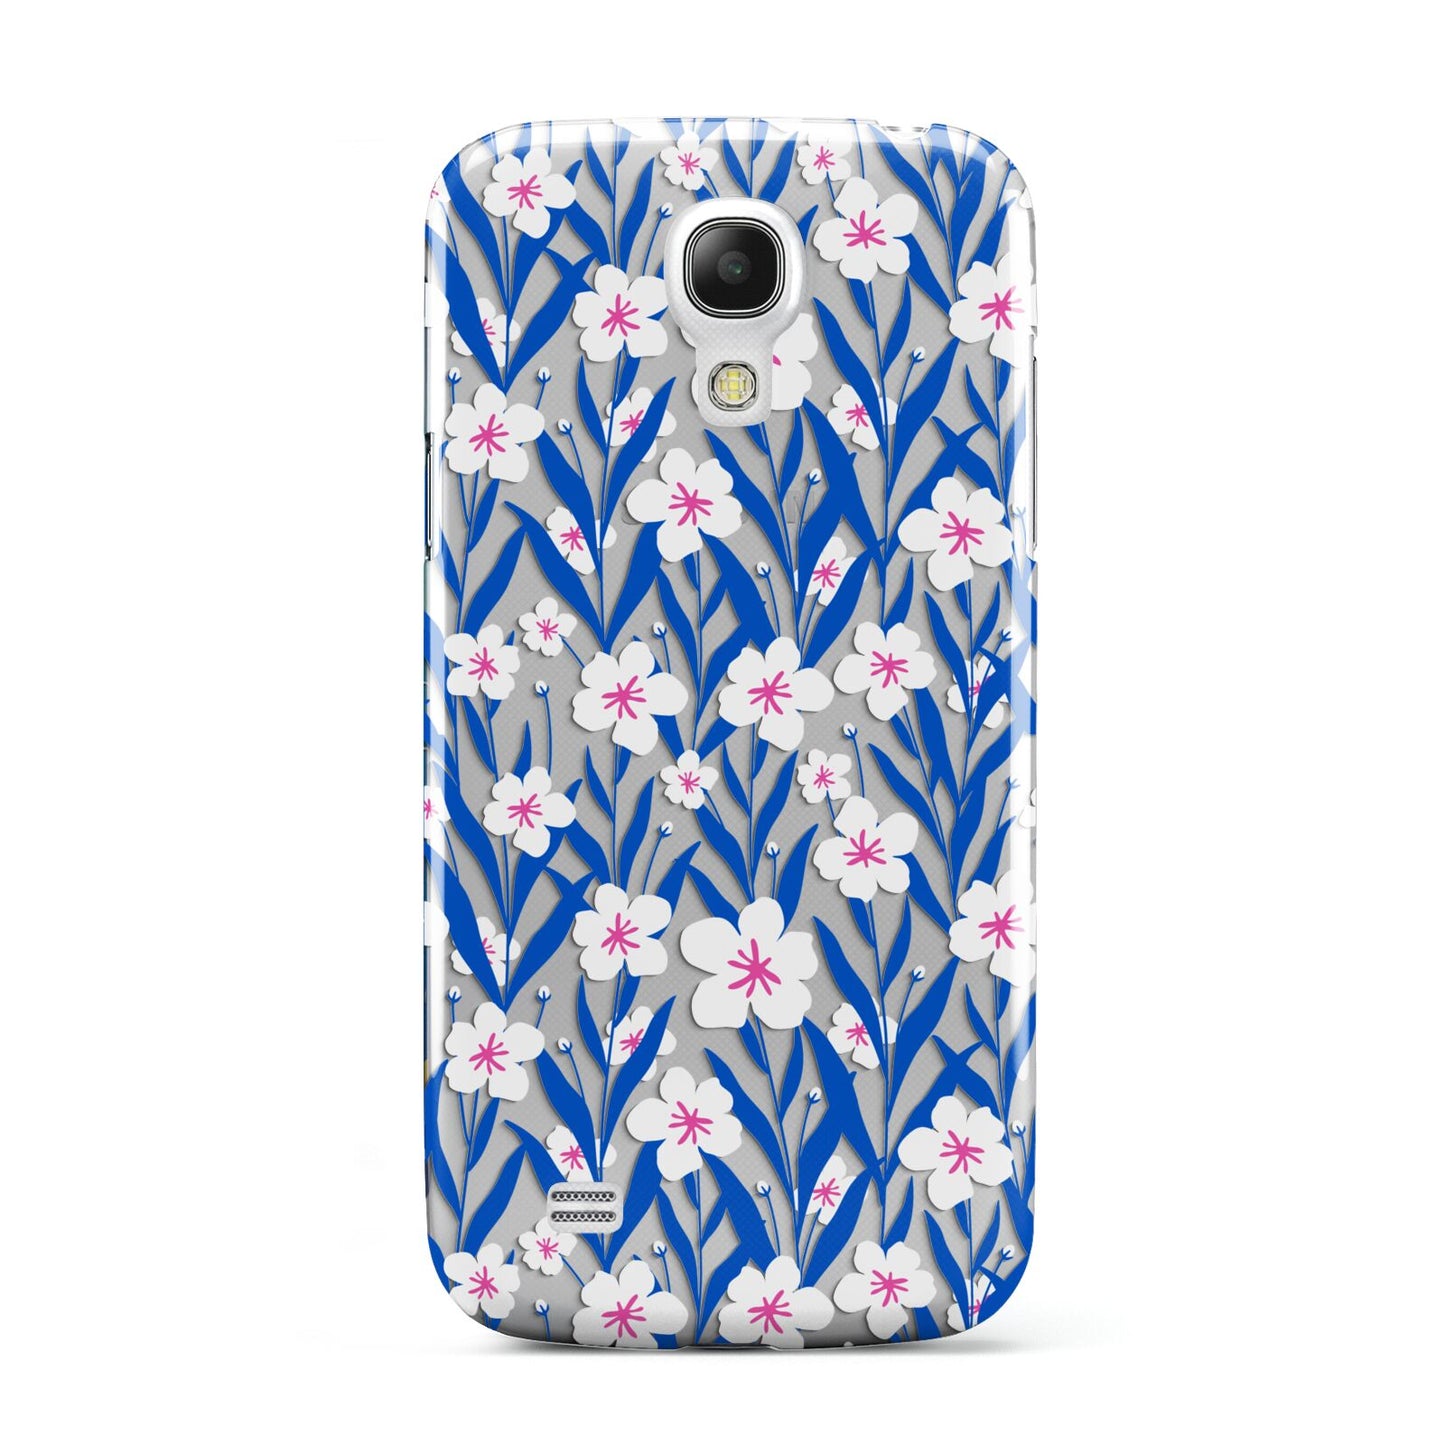 Blue and White Flowers Samsung Galaxy S4 Mini Case